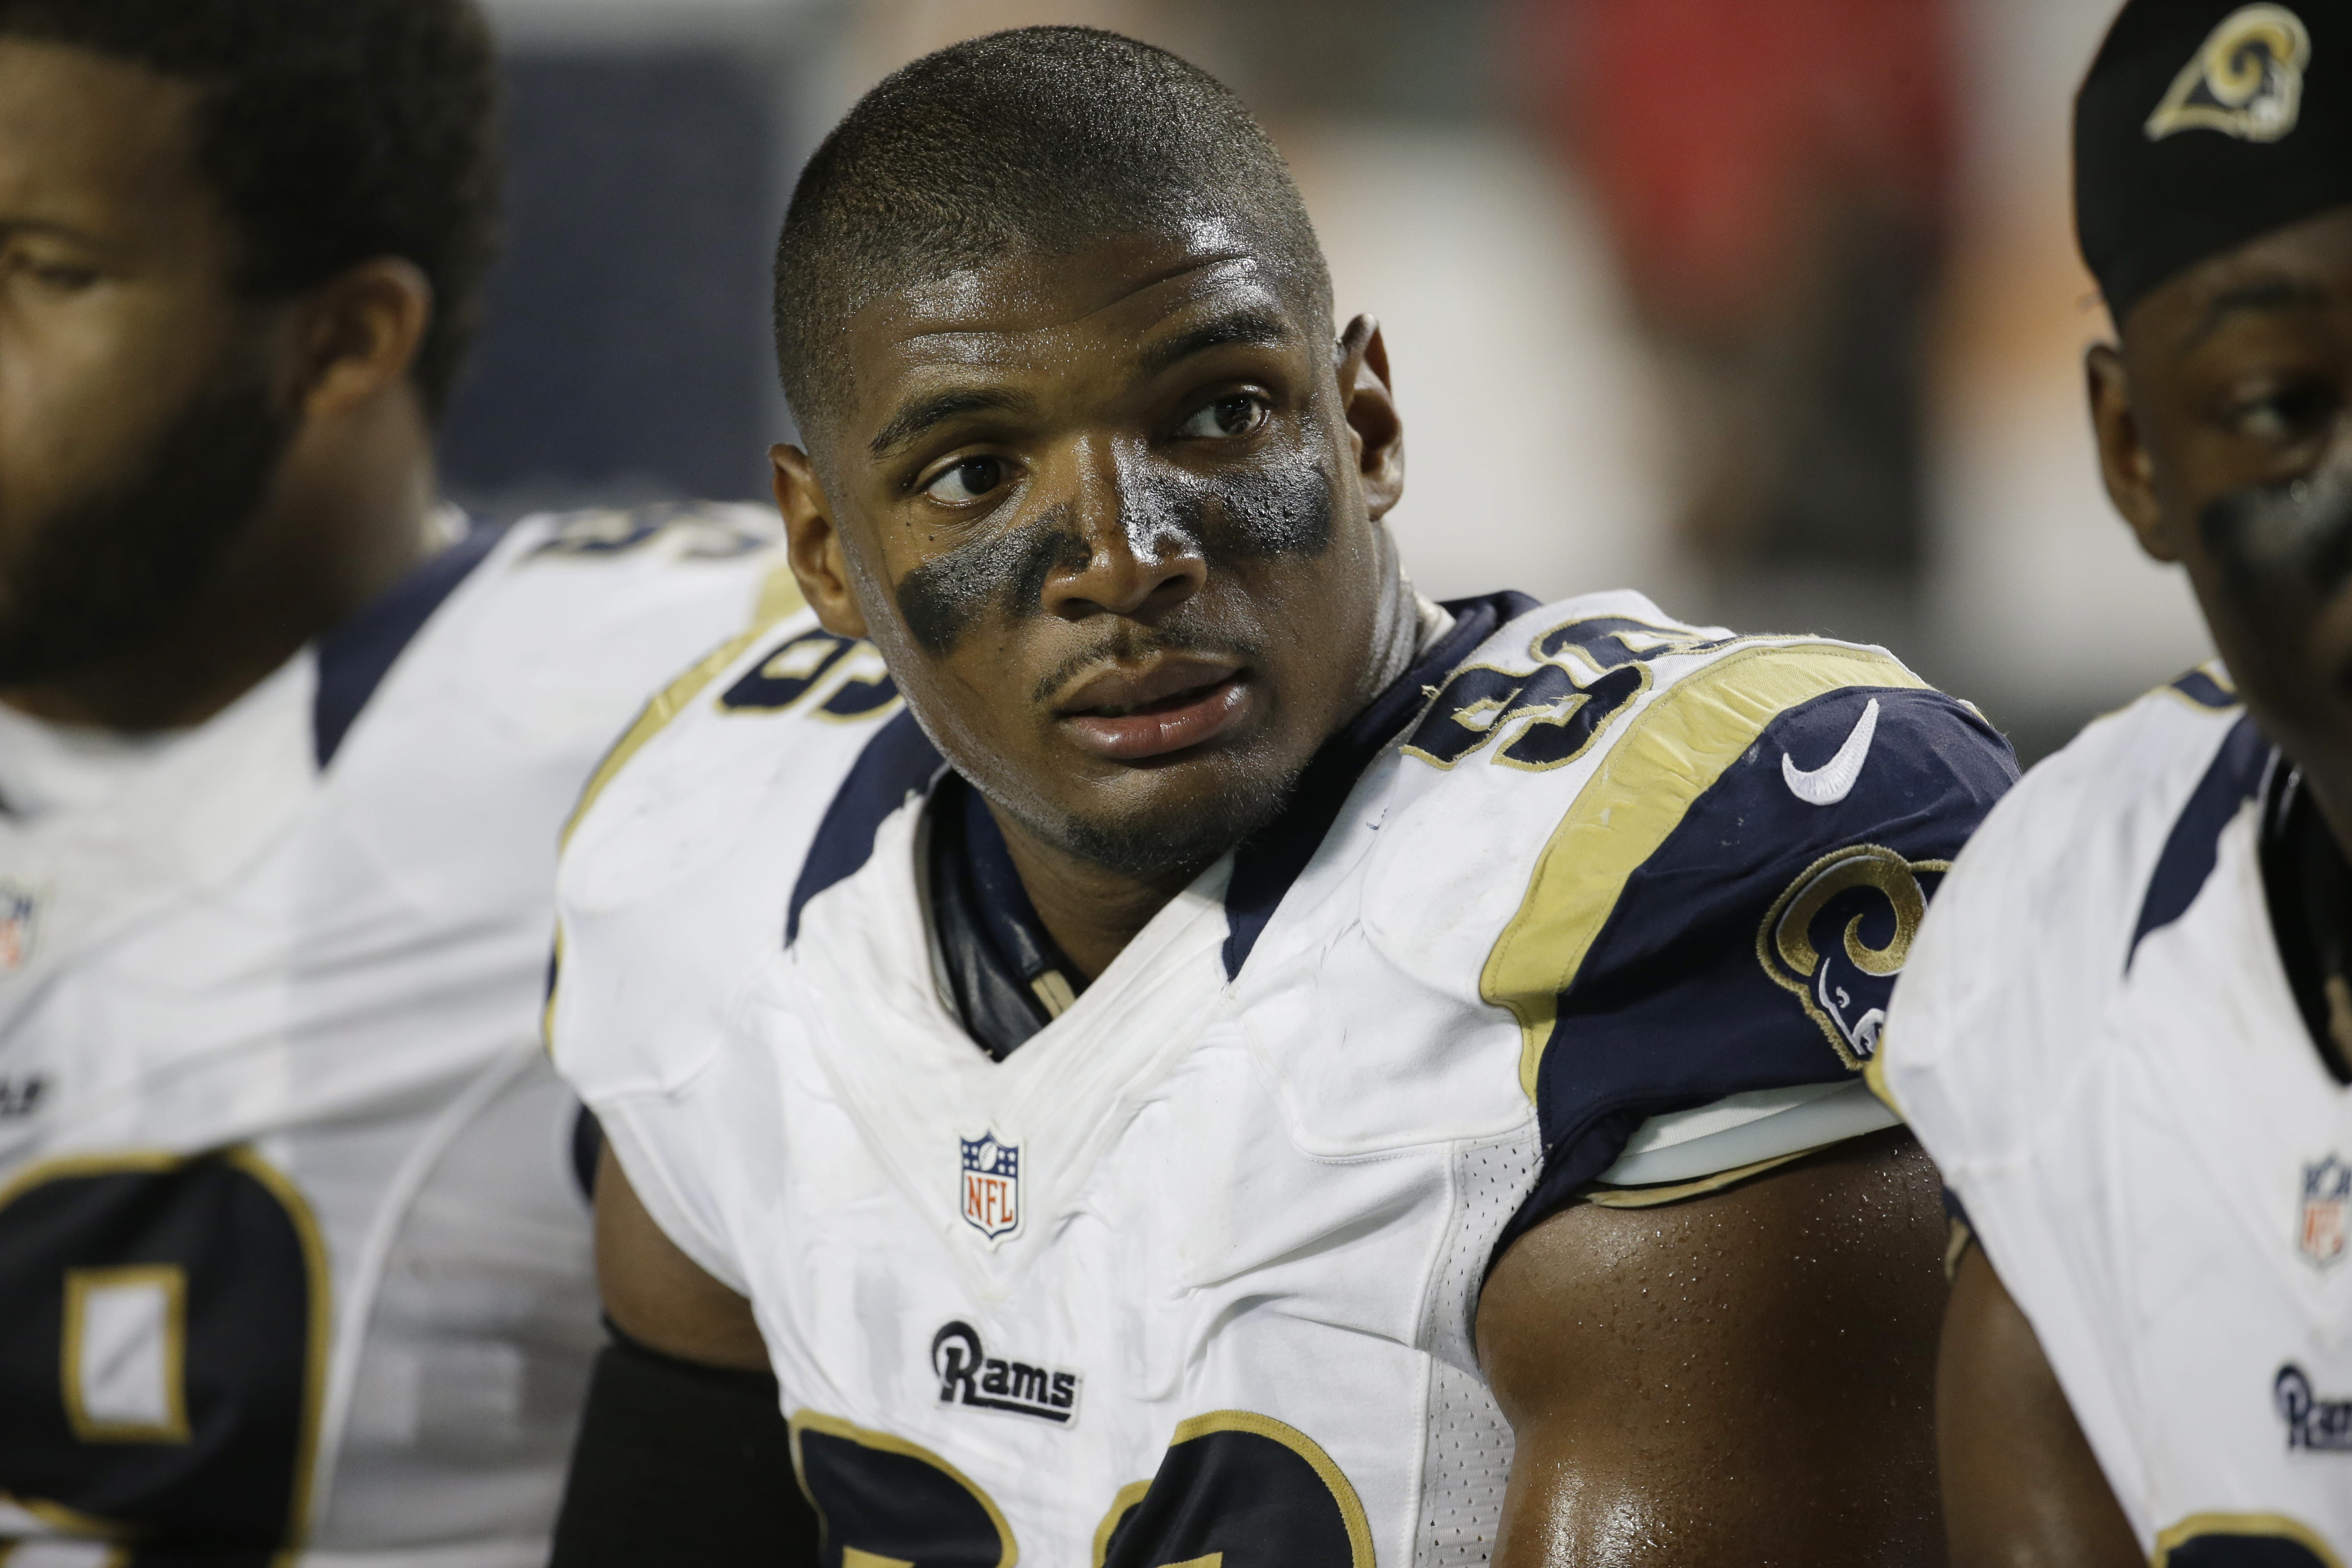 St. Louis Rams defensive end Michael Sam sits on the bench during a preseason game against the Miami Dolphins in August 2014.